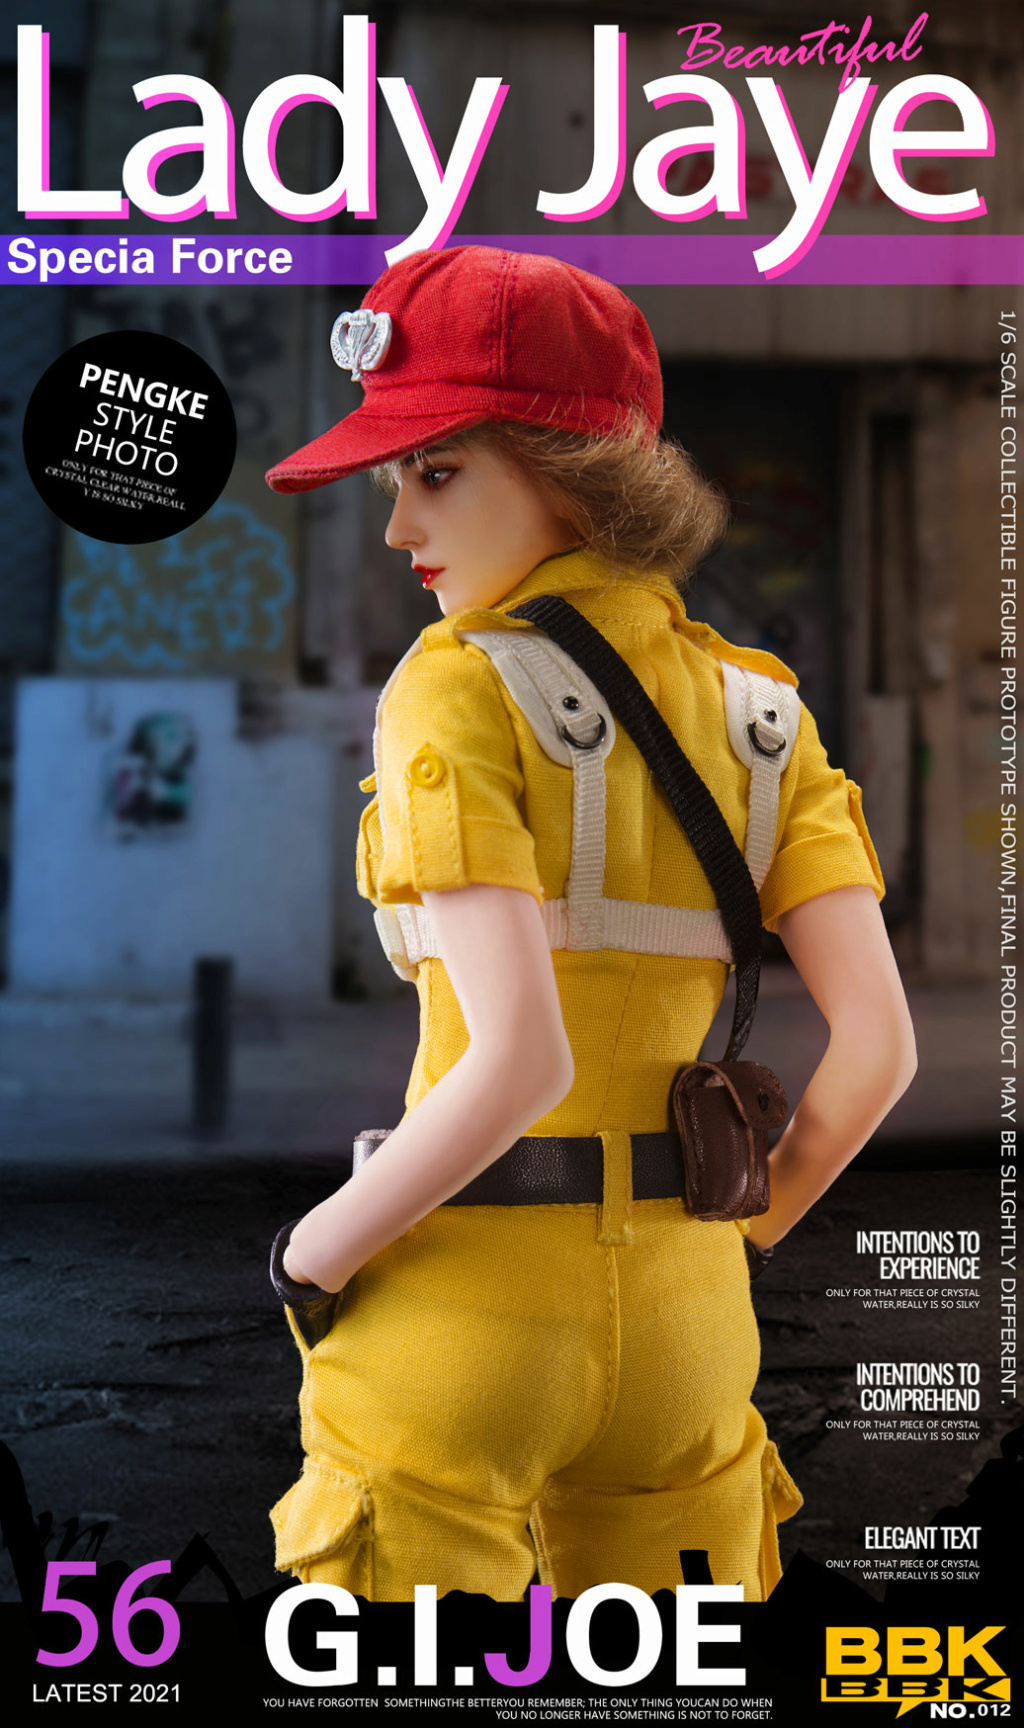 GIJoeJay - NEW PRODUCT: BBK: 1/6 GIJOE Jay Female Soldier Action Figure# 14575812